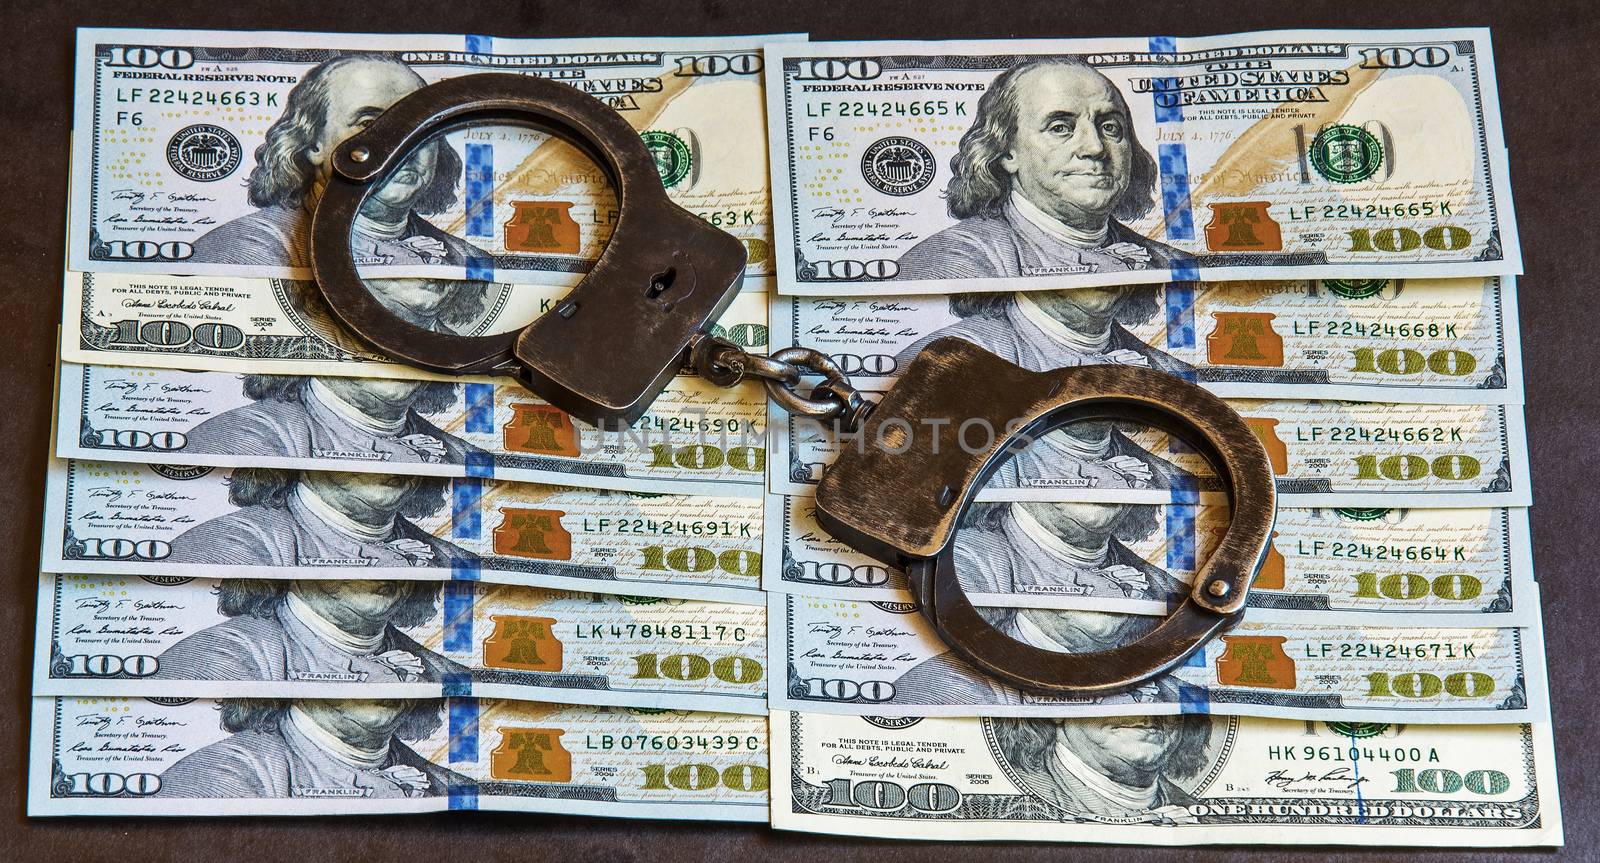 Metal handcuffs on the US currency bills
